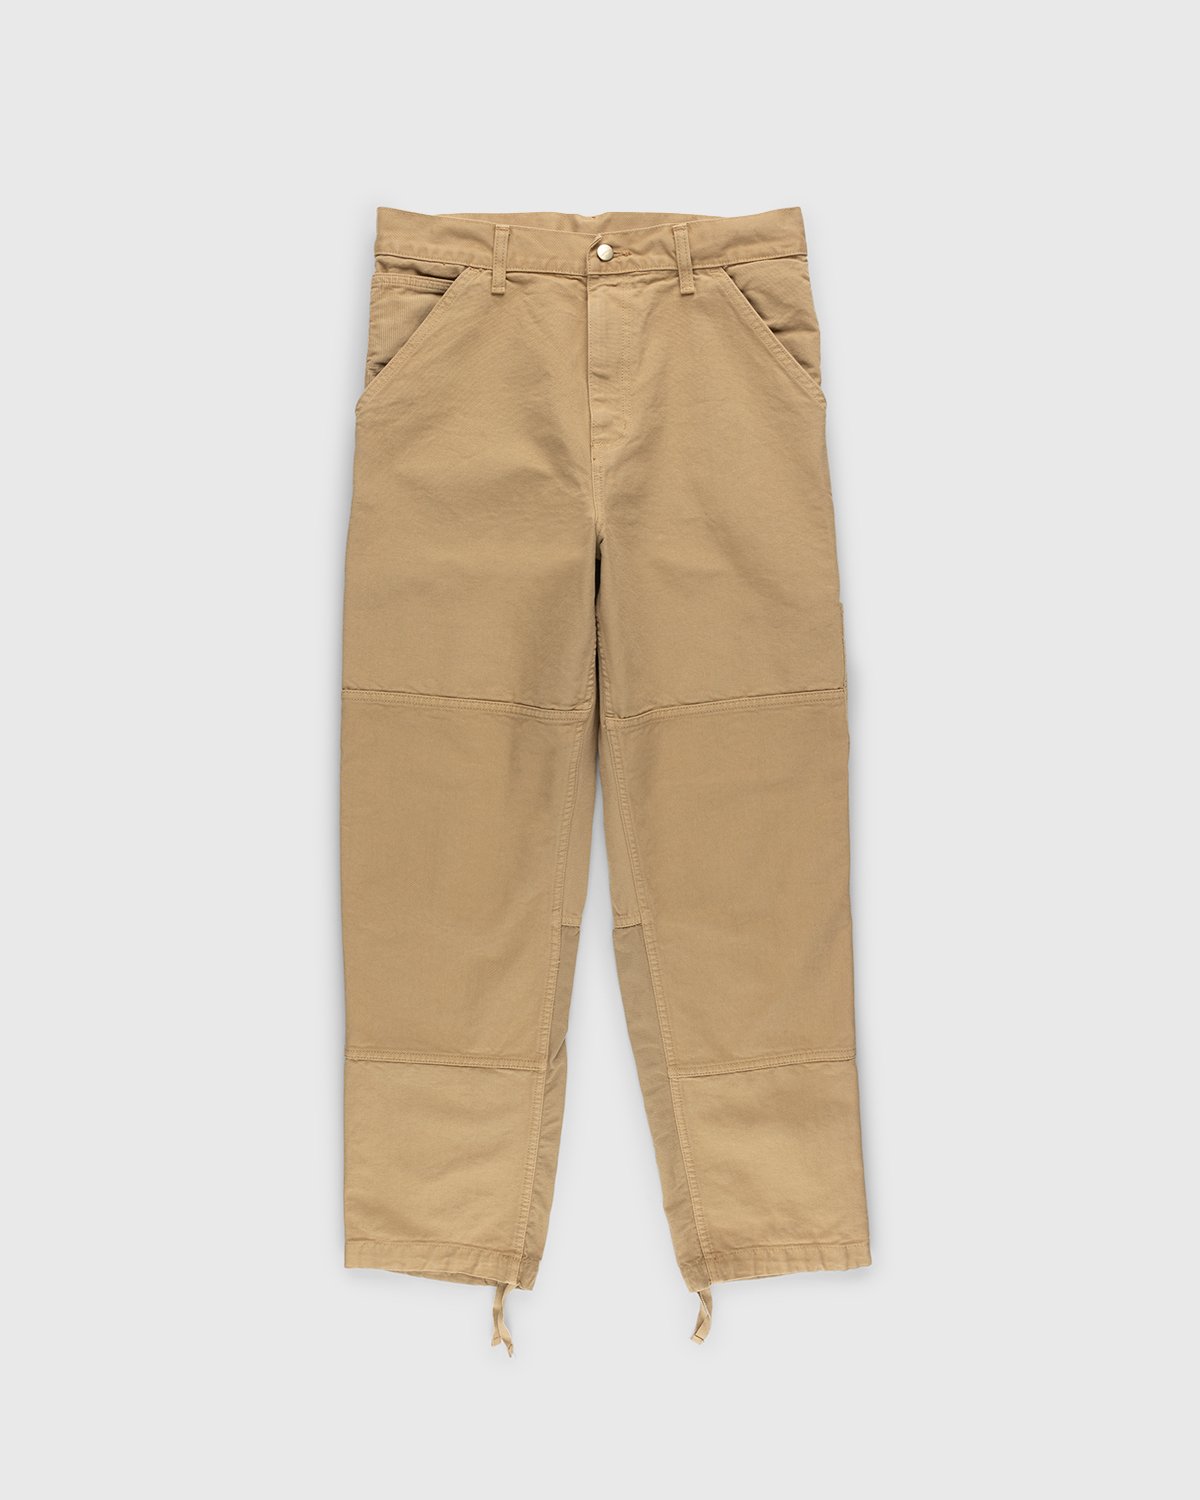 Carhartt WIP - Medley Pant Dusty Hamilton Brown Garment Dyed - Clothing - Brown - Image 1